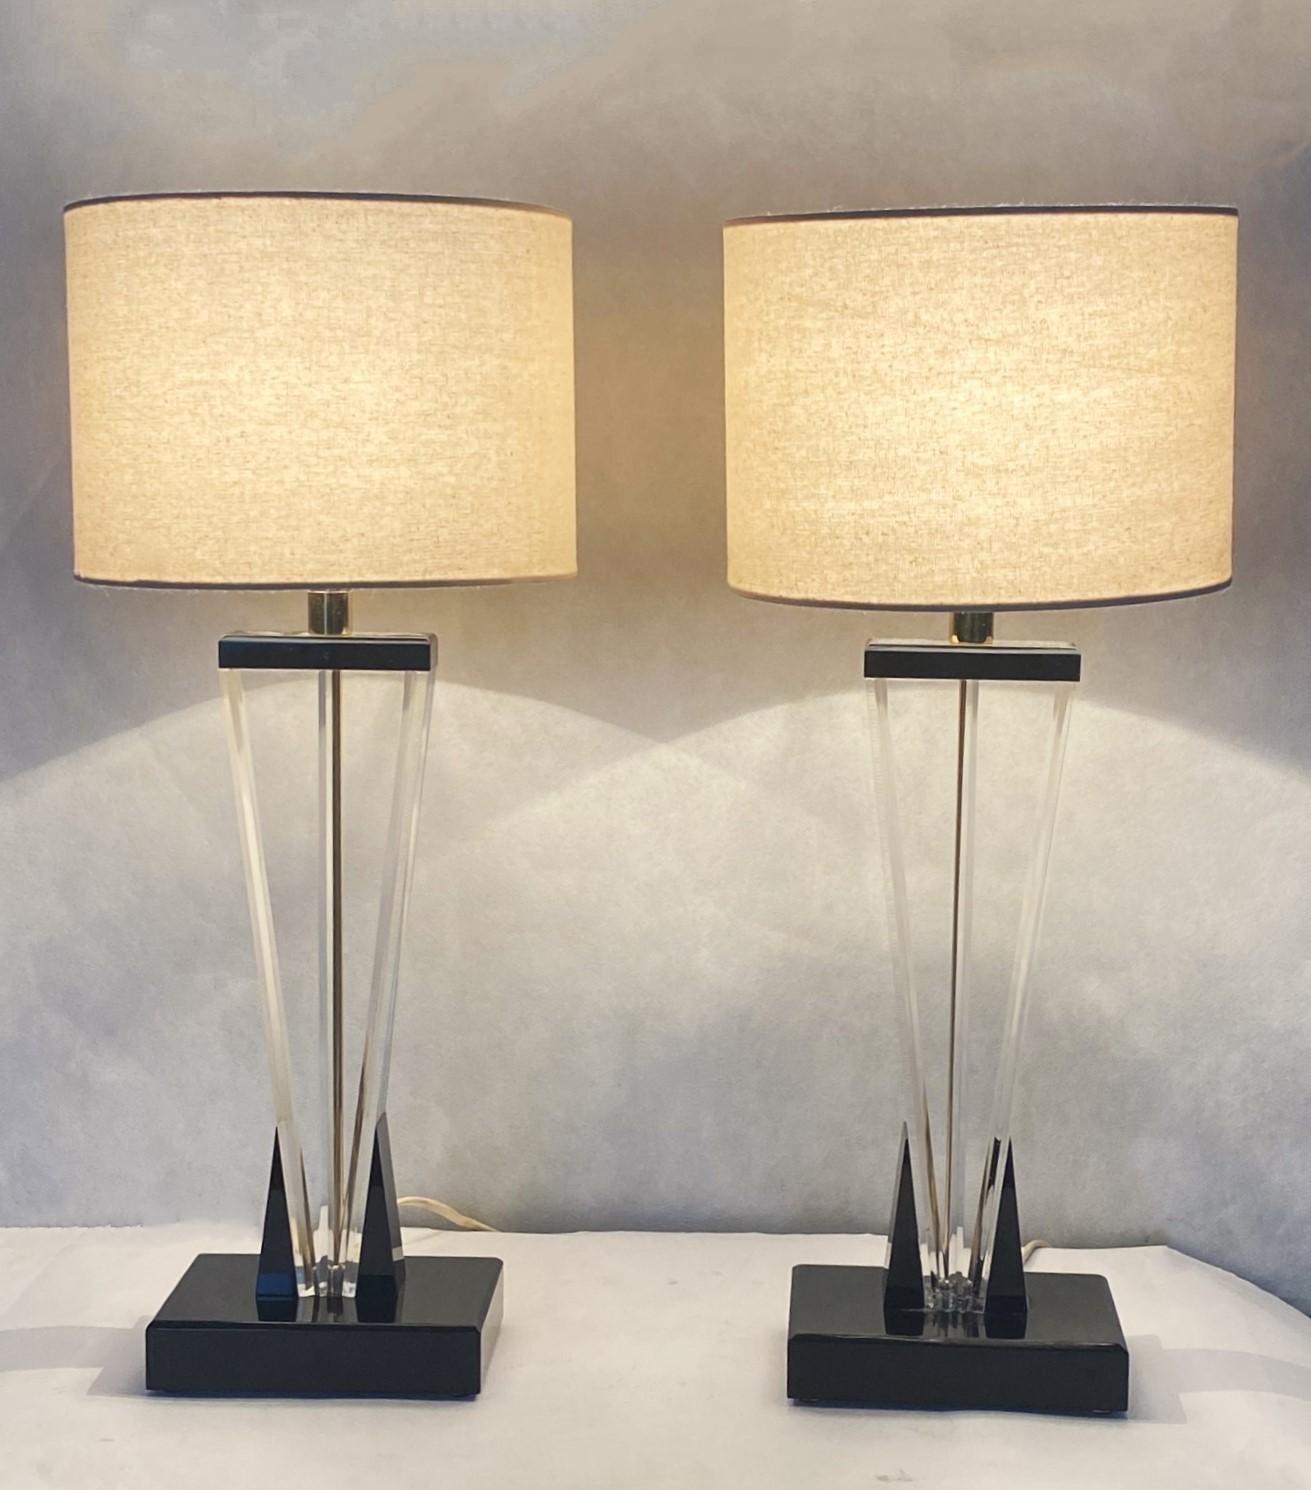 20th Century Pair of Italian Lucite Table Lamps, 1960s For Sale